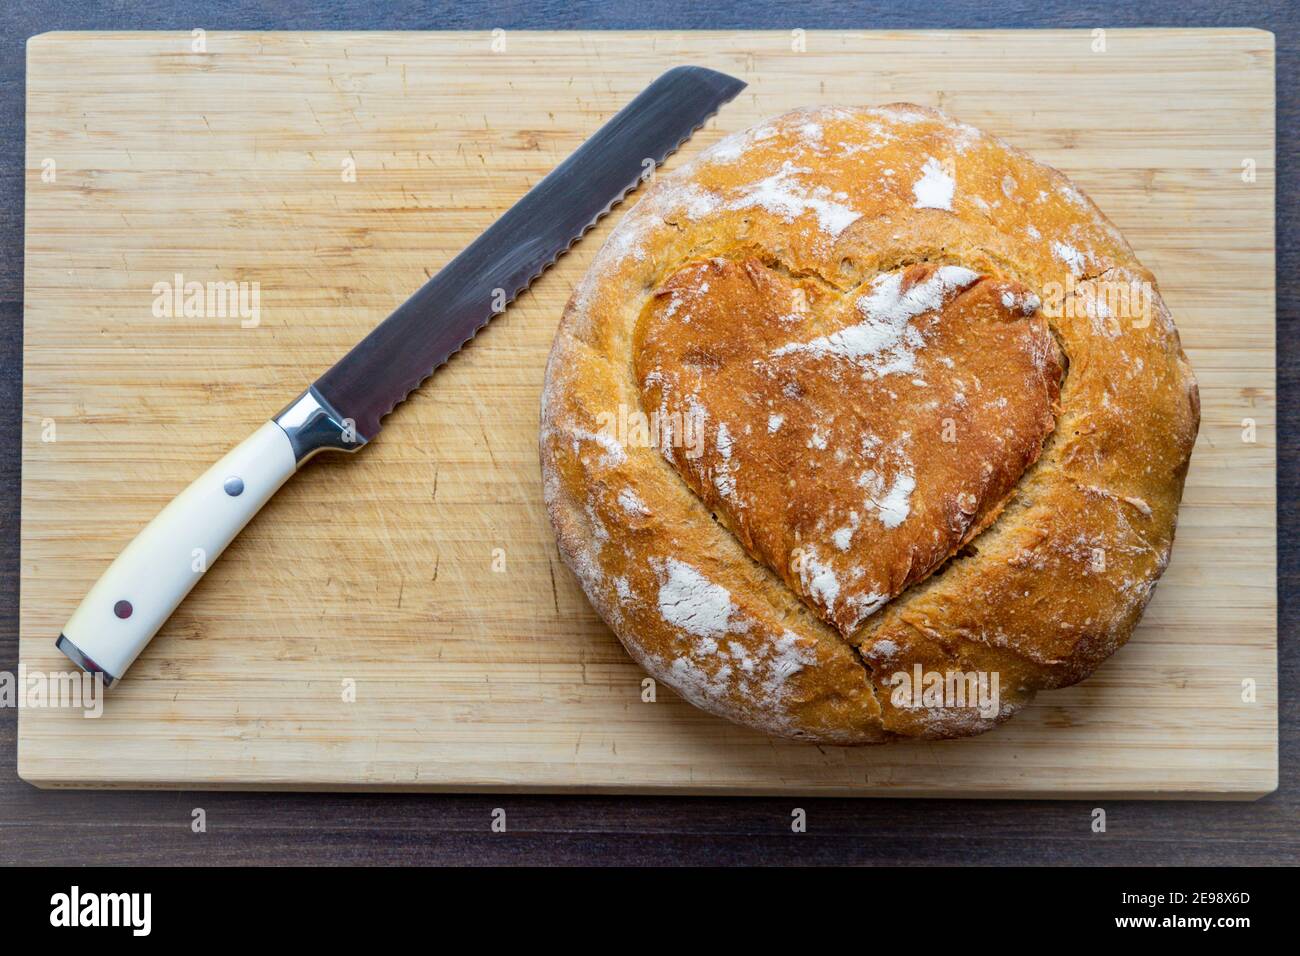 Freshly baked brown bread with a heart shaped crust and a bread knife on a wooden plate Stock Photo